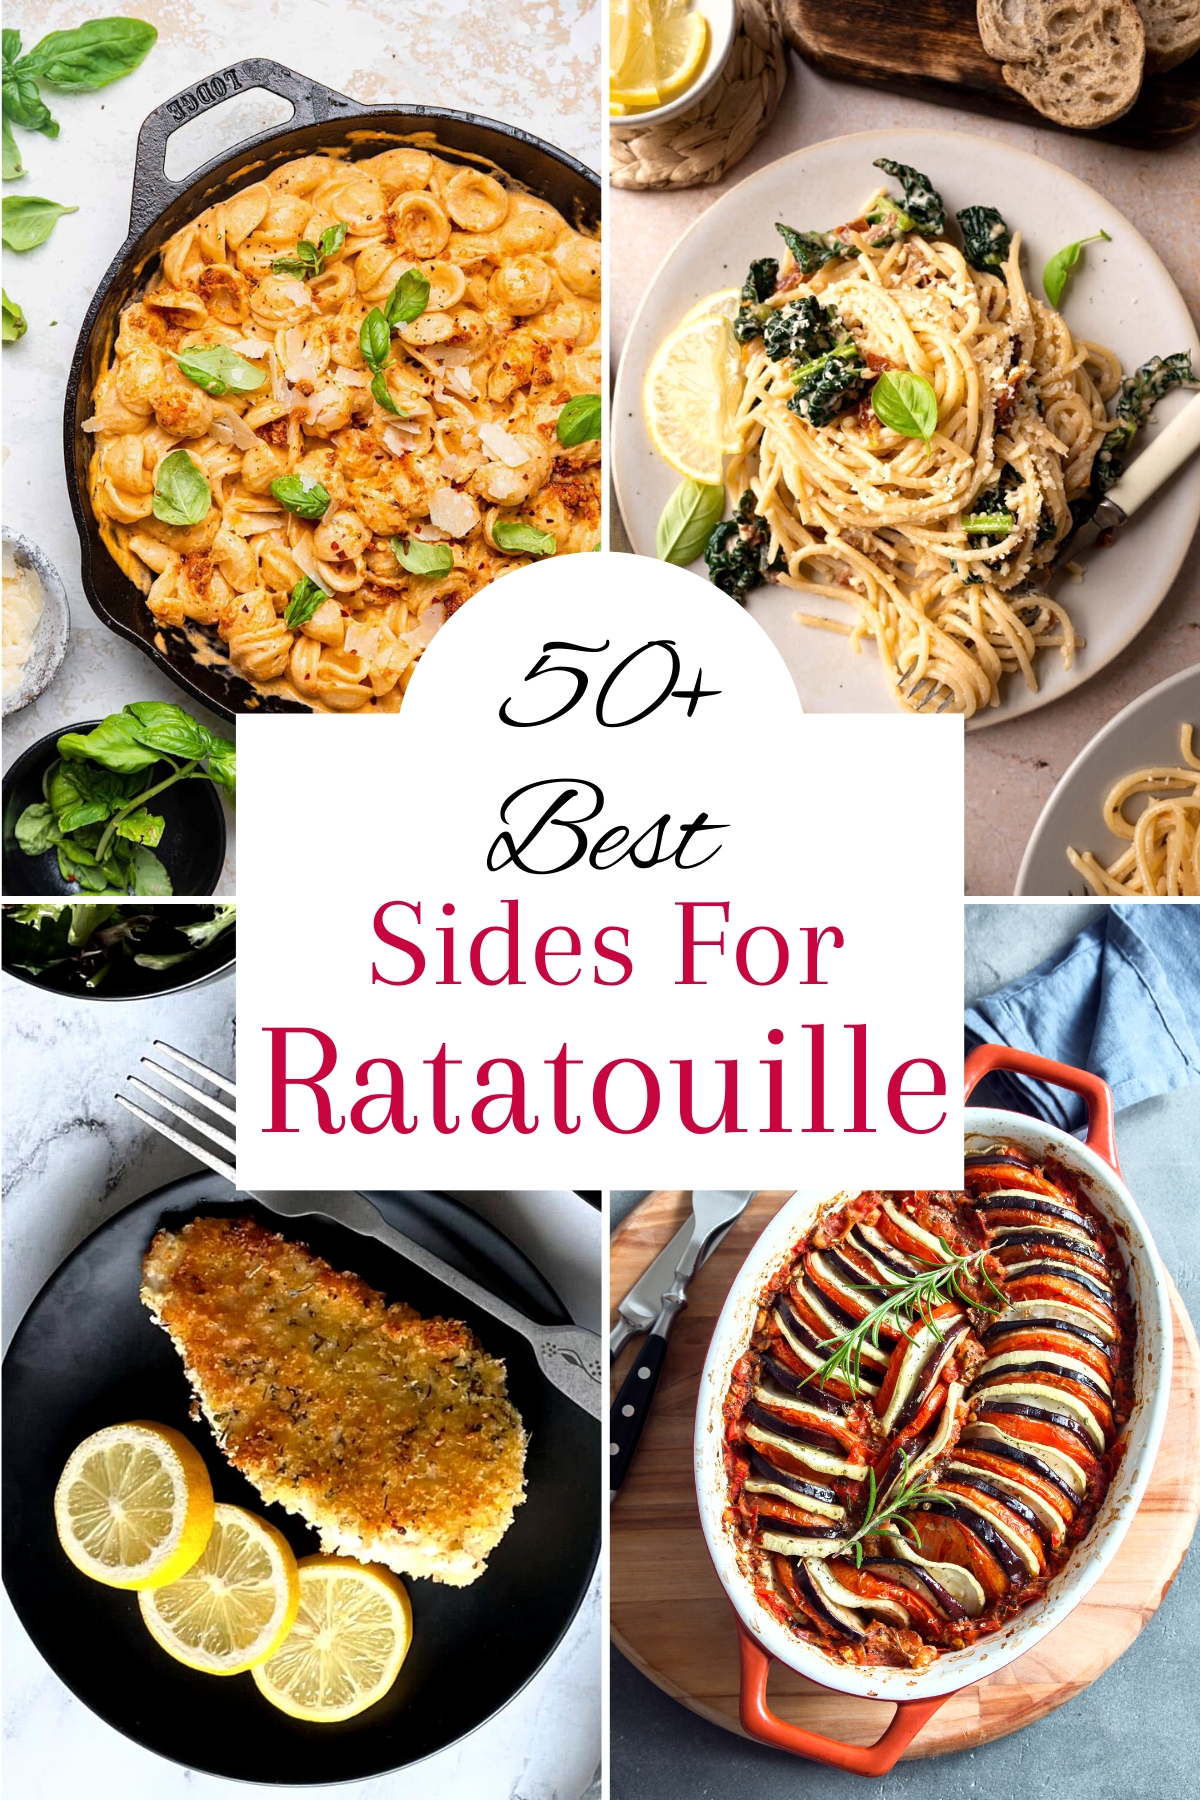 Collage of four dishes including a layered ratatouille in an oval casserole dish, crispy chicken cutlet with lemon slices on a black plate, a pot of creamy pink pasta and a plate of white spaghetti noodles garnished with basil leaves.